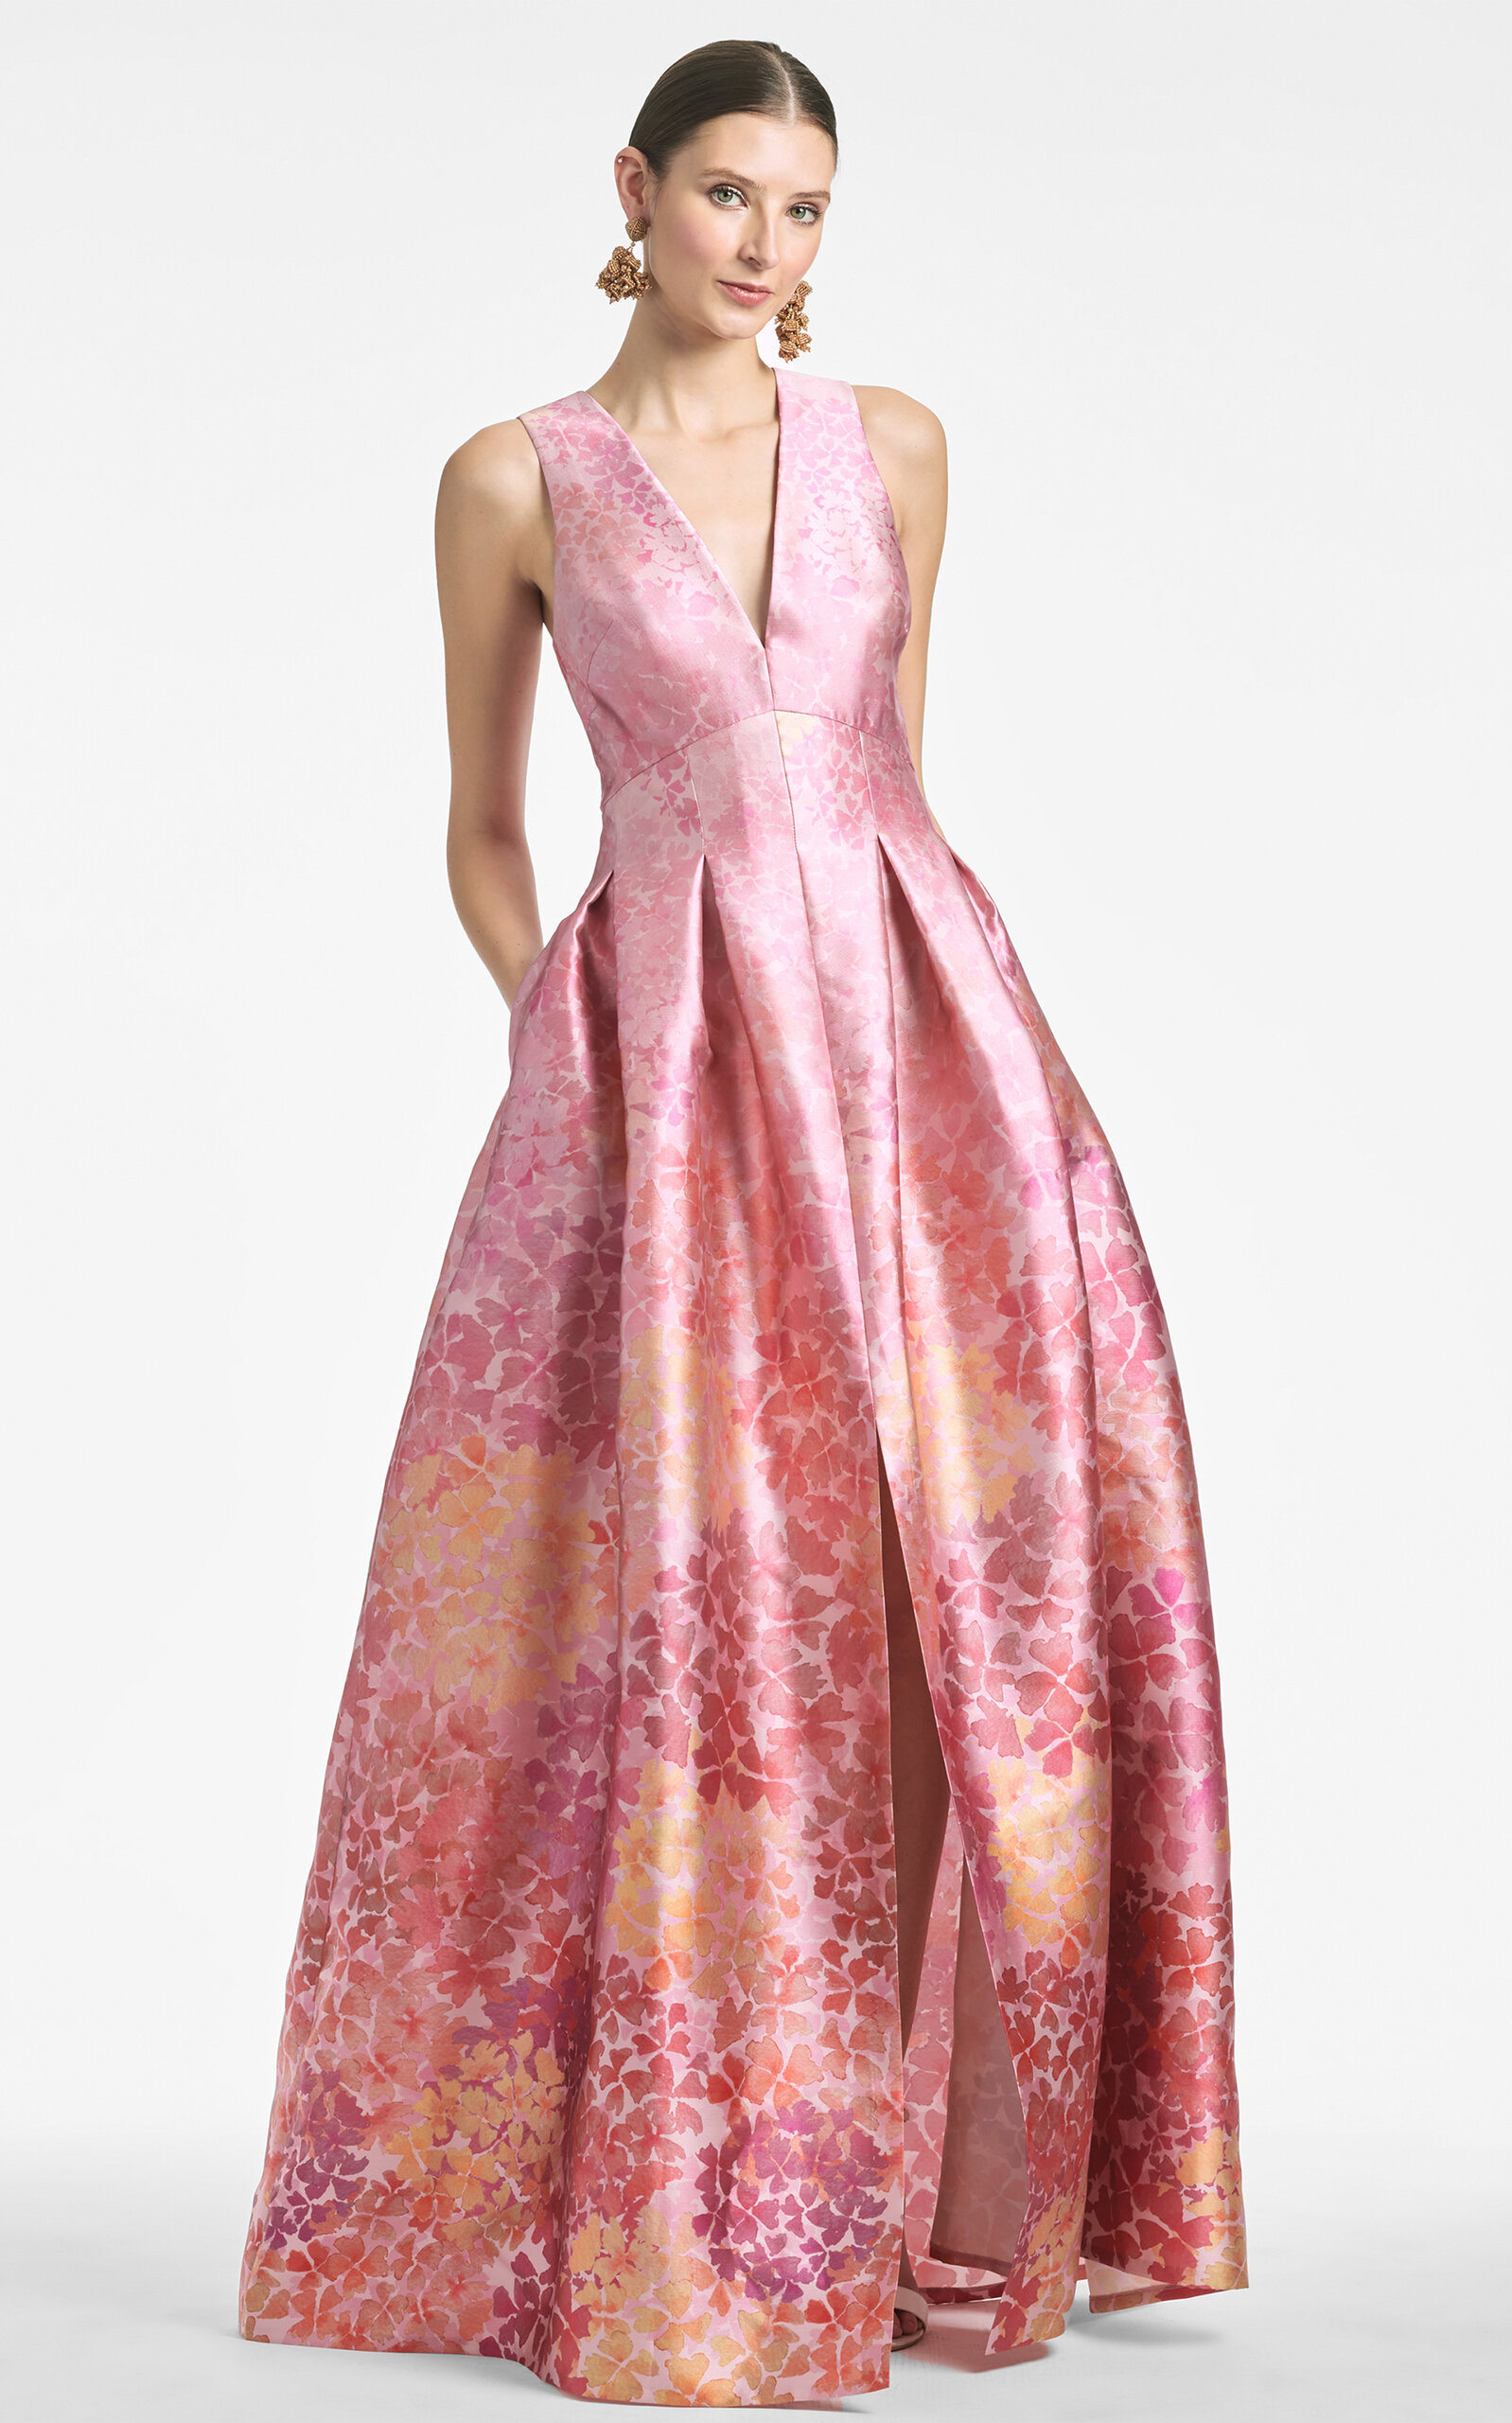 SACHIN & BABI BROOKE OMBRE FLORAL SATIN GOWN